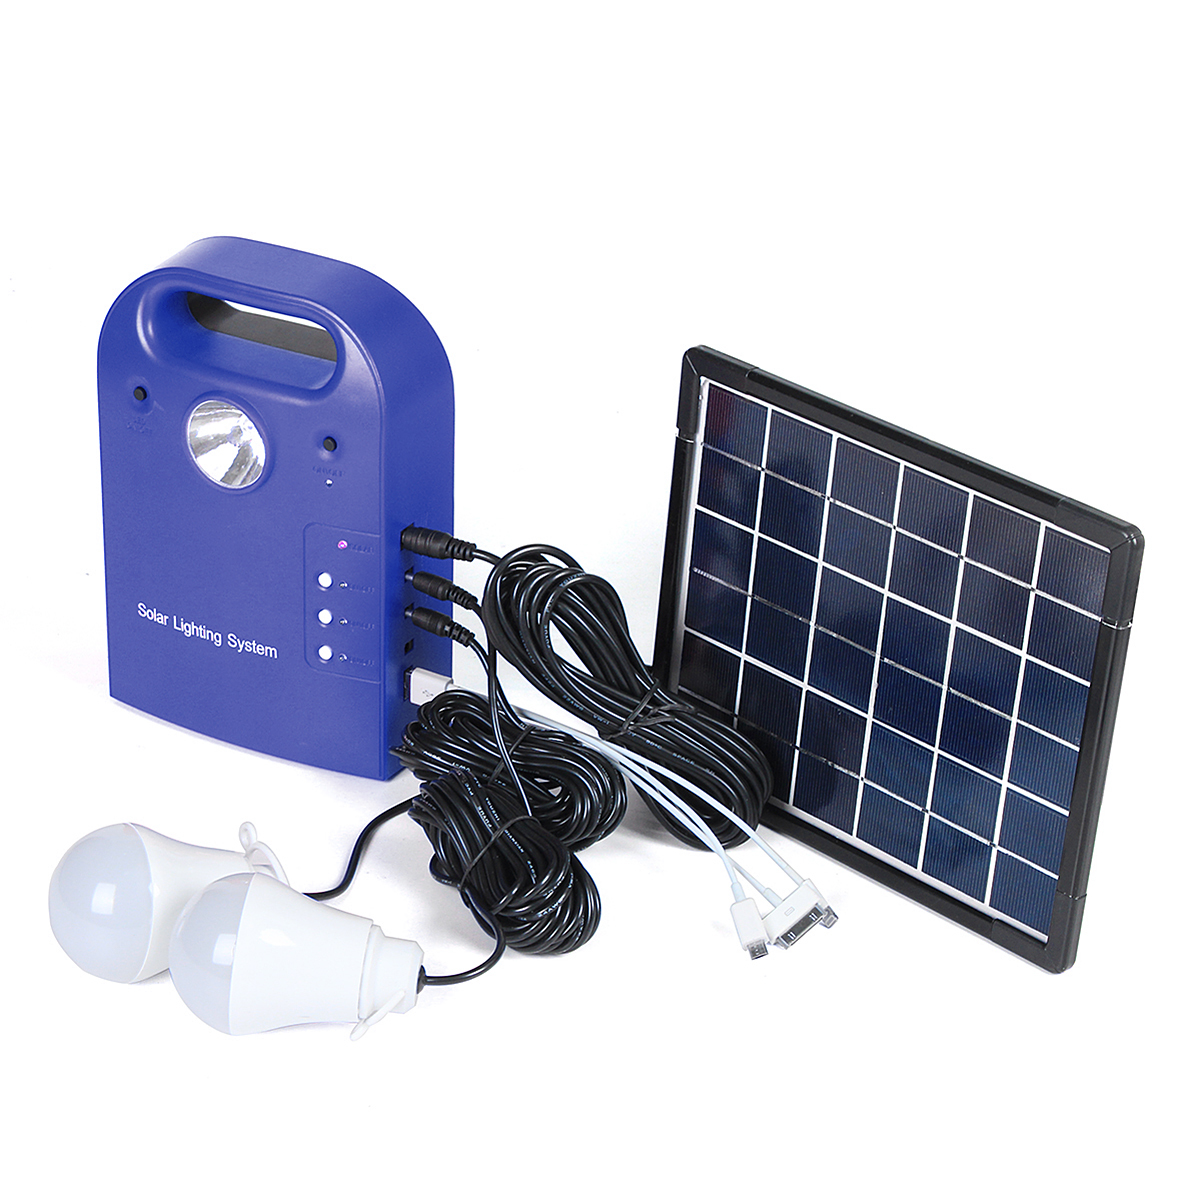 28Wh Portable Small DC Solar Panels Charging Generator Power Generation System With LED Bulb 1